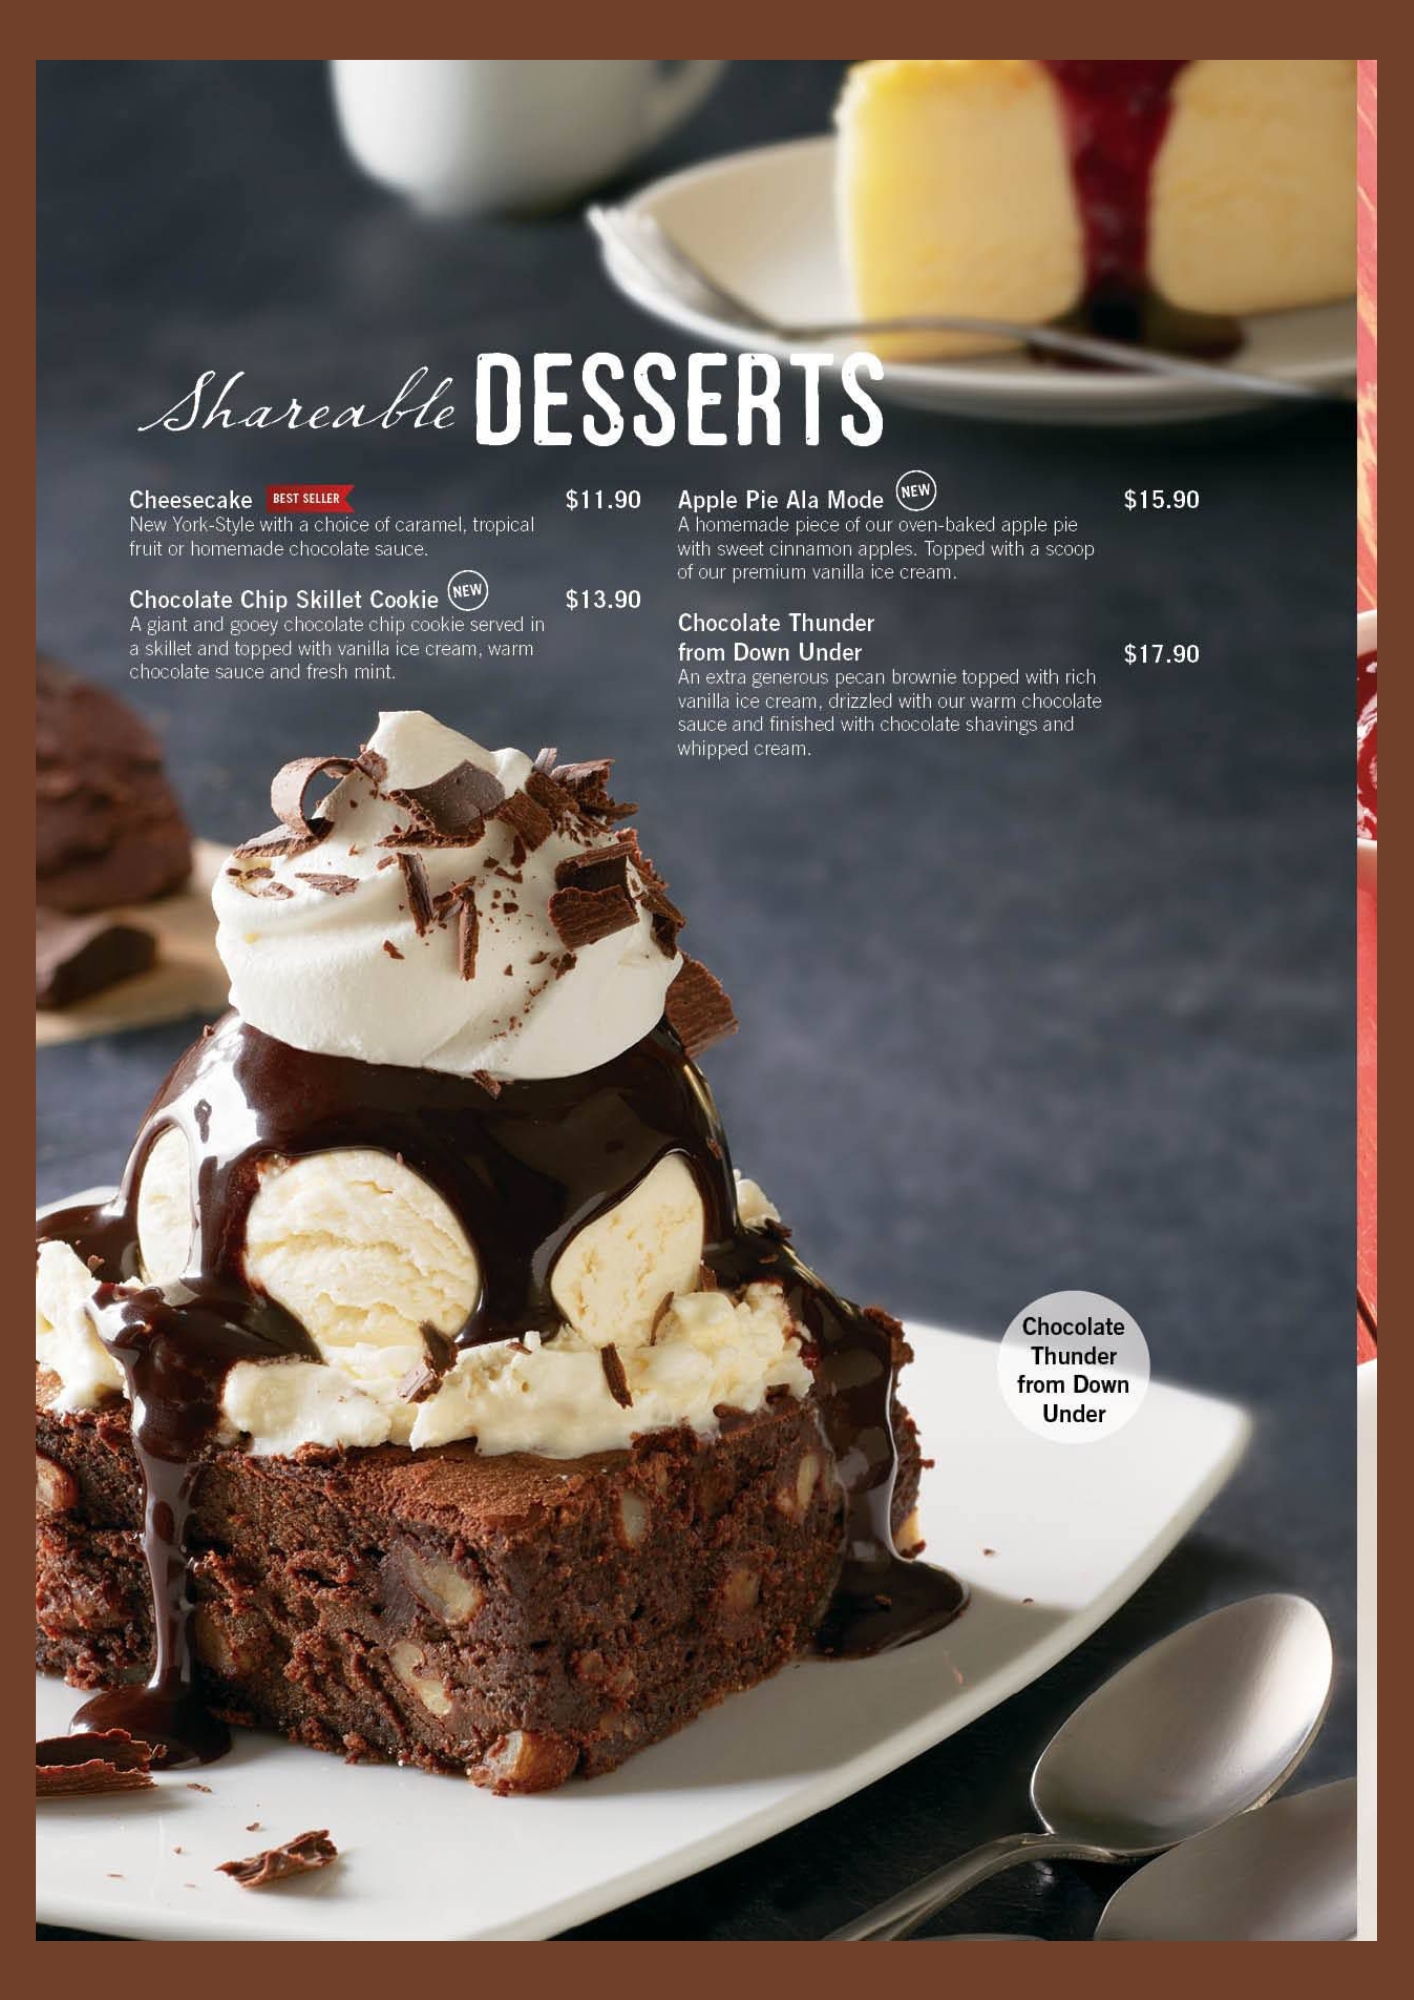 Outback Steakhouse Desserts